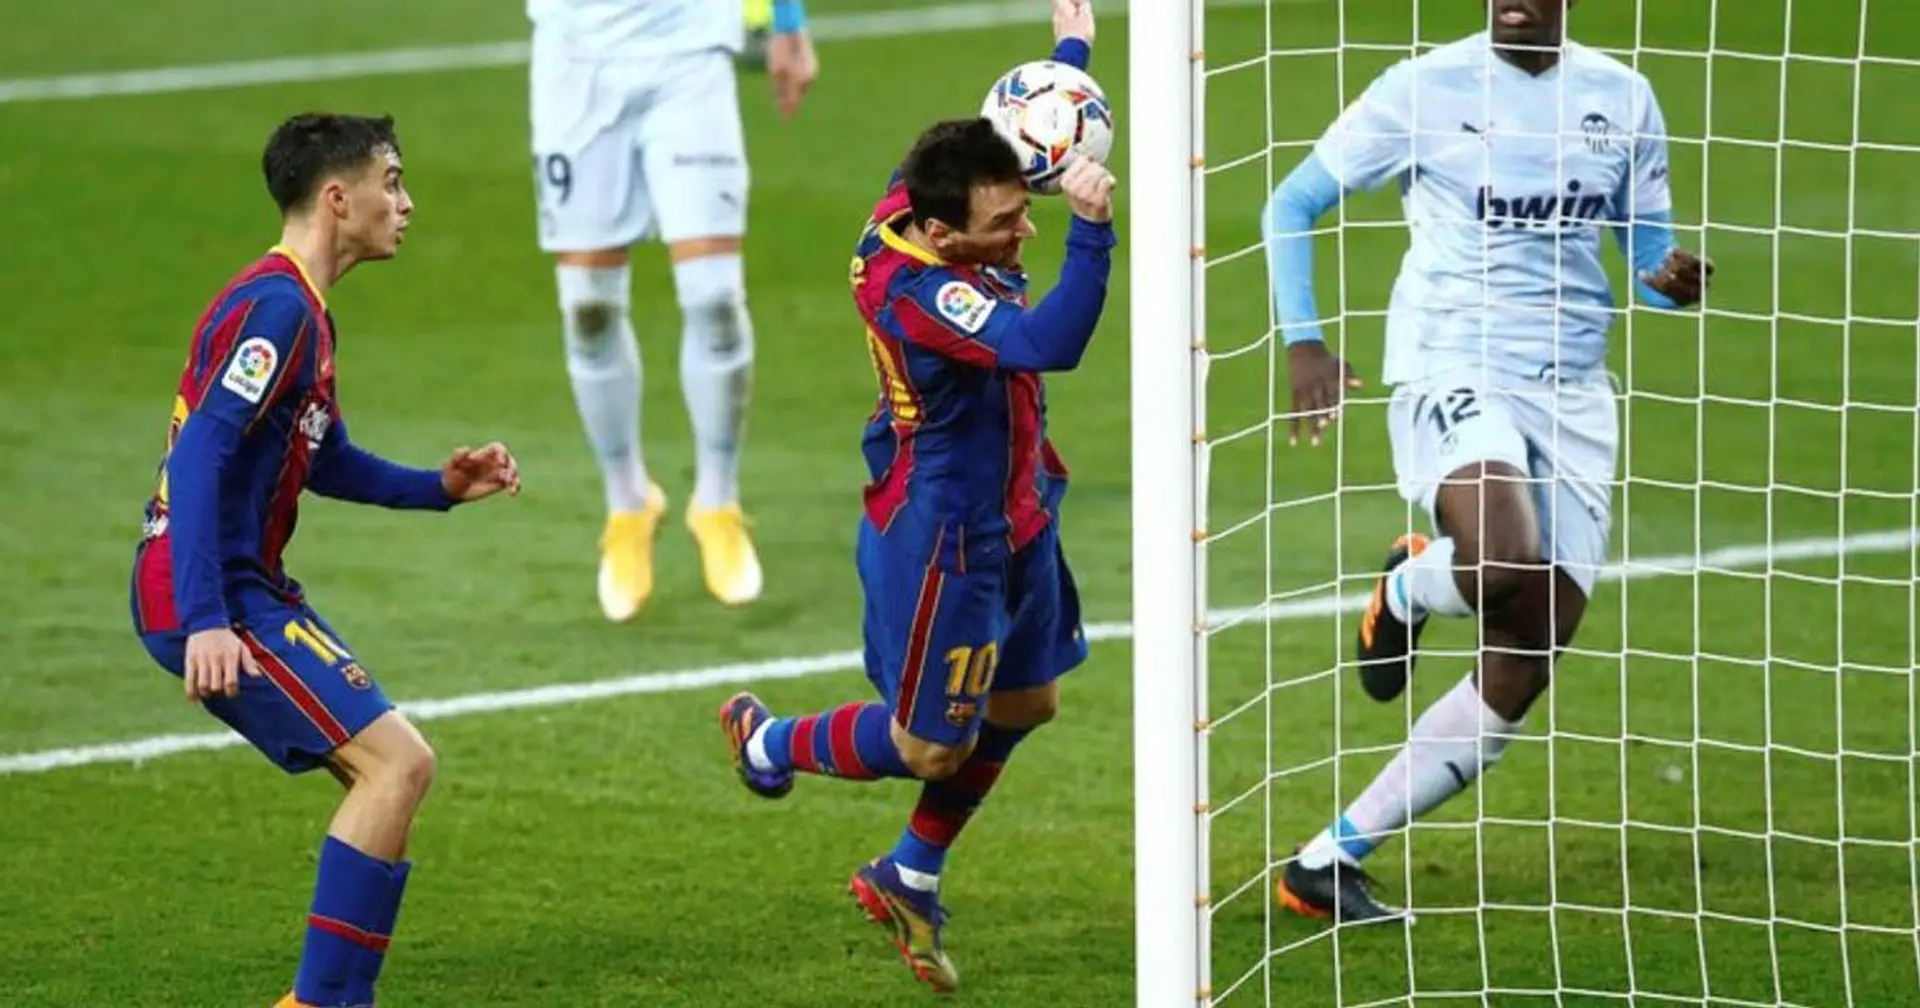 1st header in almost 4 years: 4 key facts behind Messi's record-breaking Valencia goal